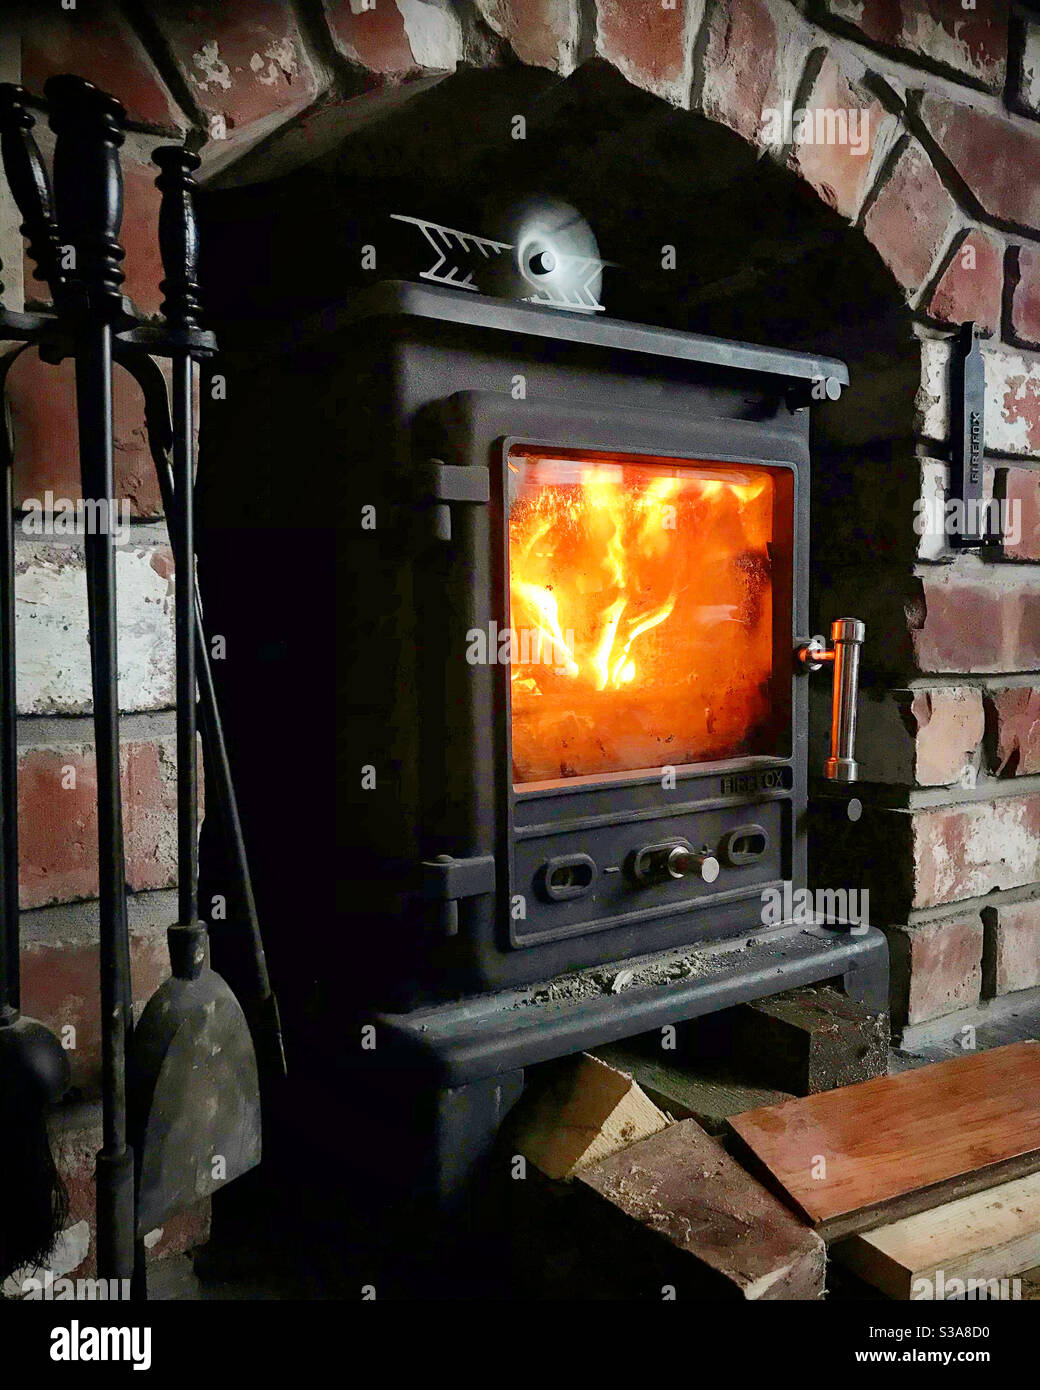 44,176 Wood Burning Stove Images, Stock Photos, 3D objects, & Vectors